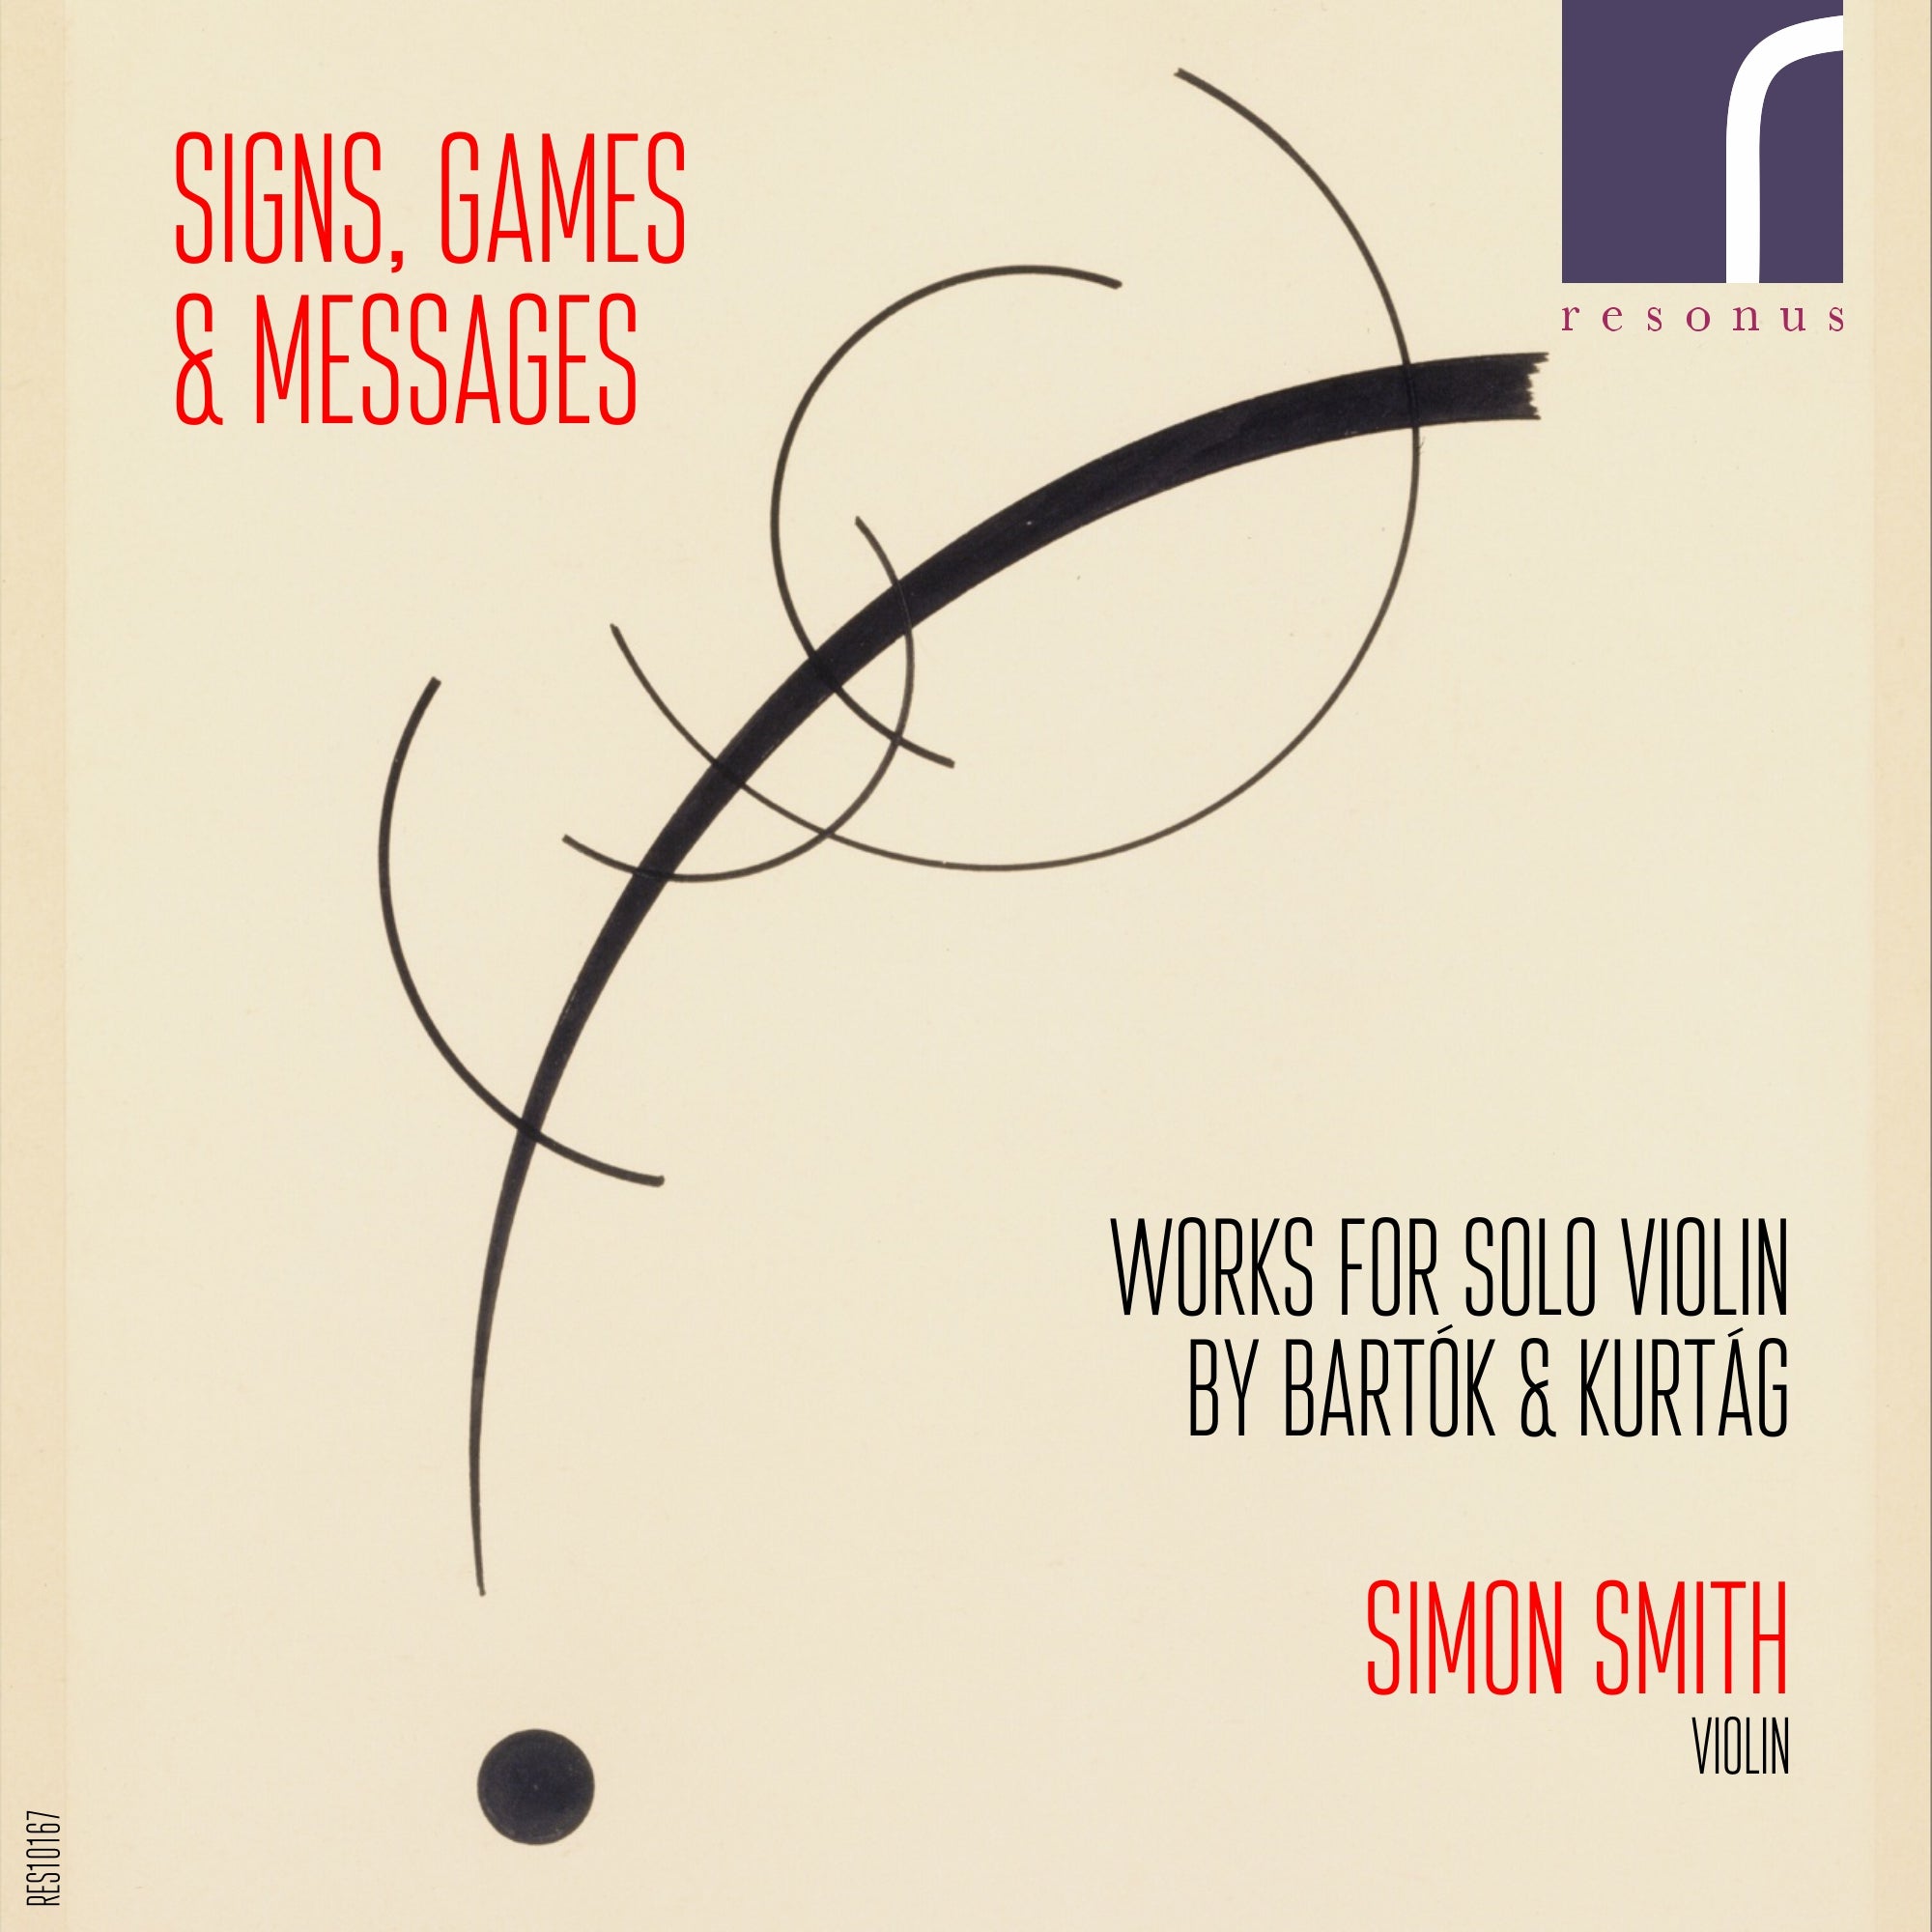 Signs, Games & Messages: Works for Solo Violin by Bartók and Kurtág